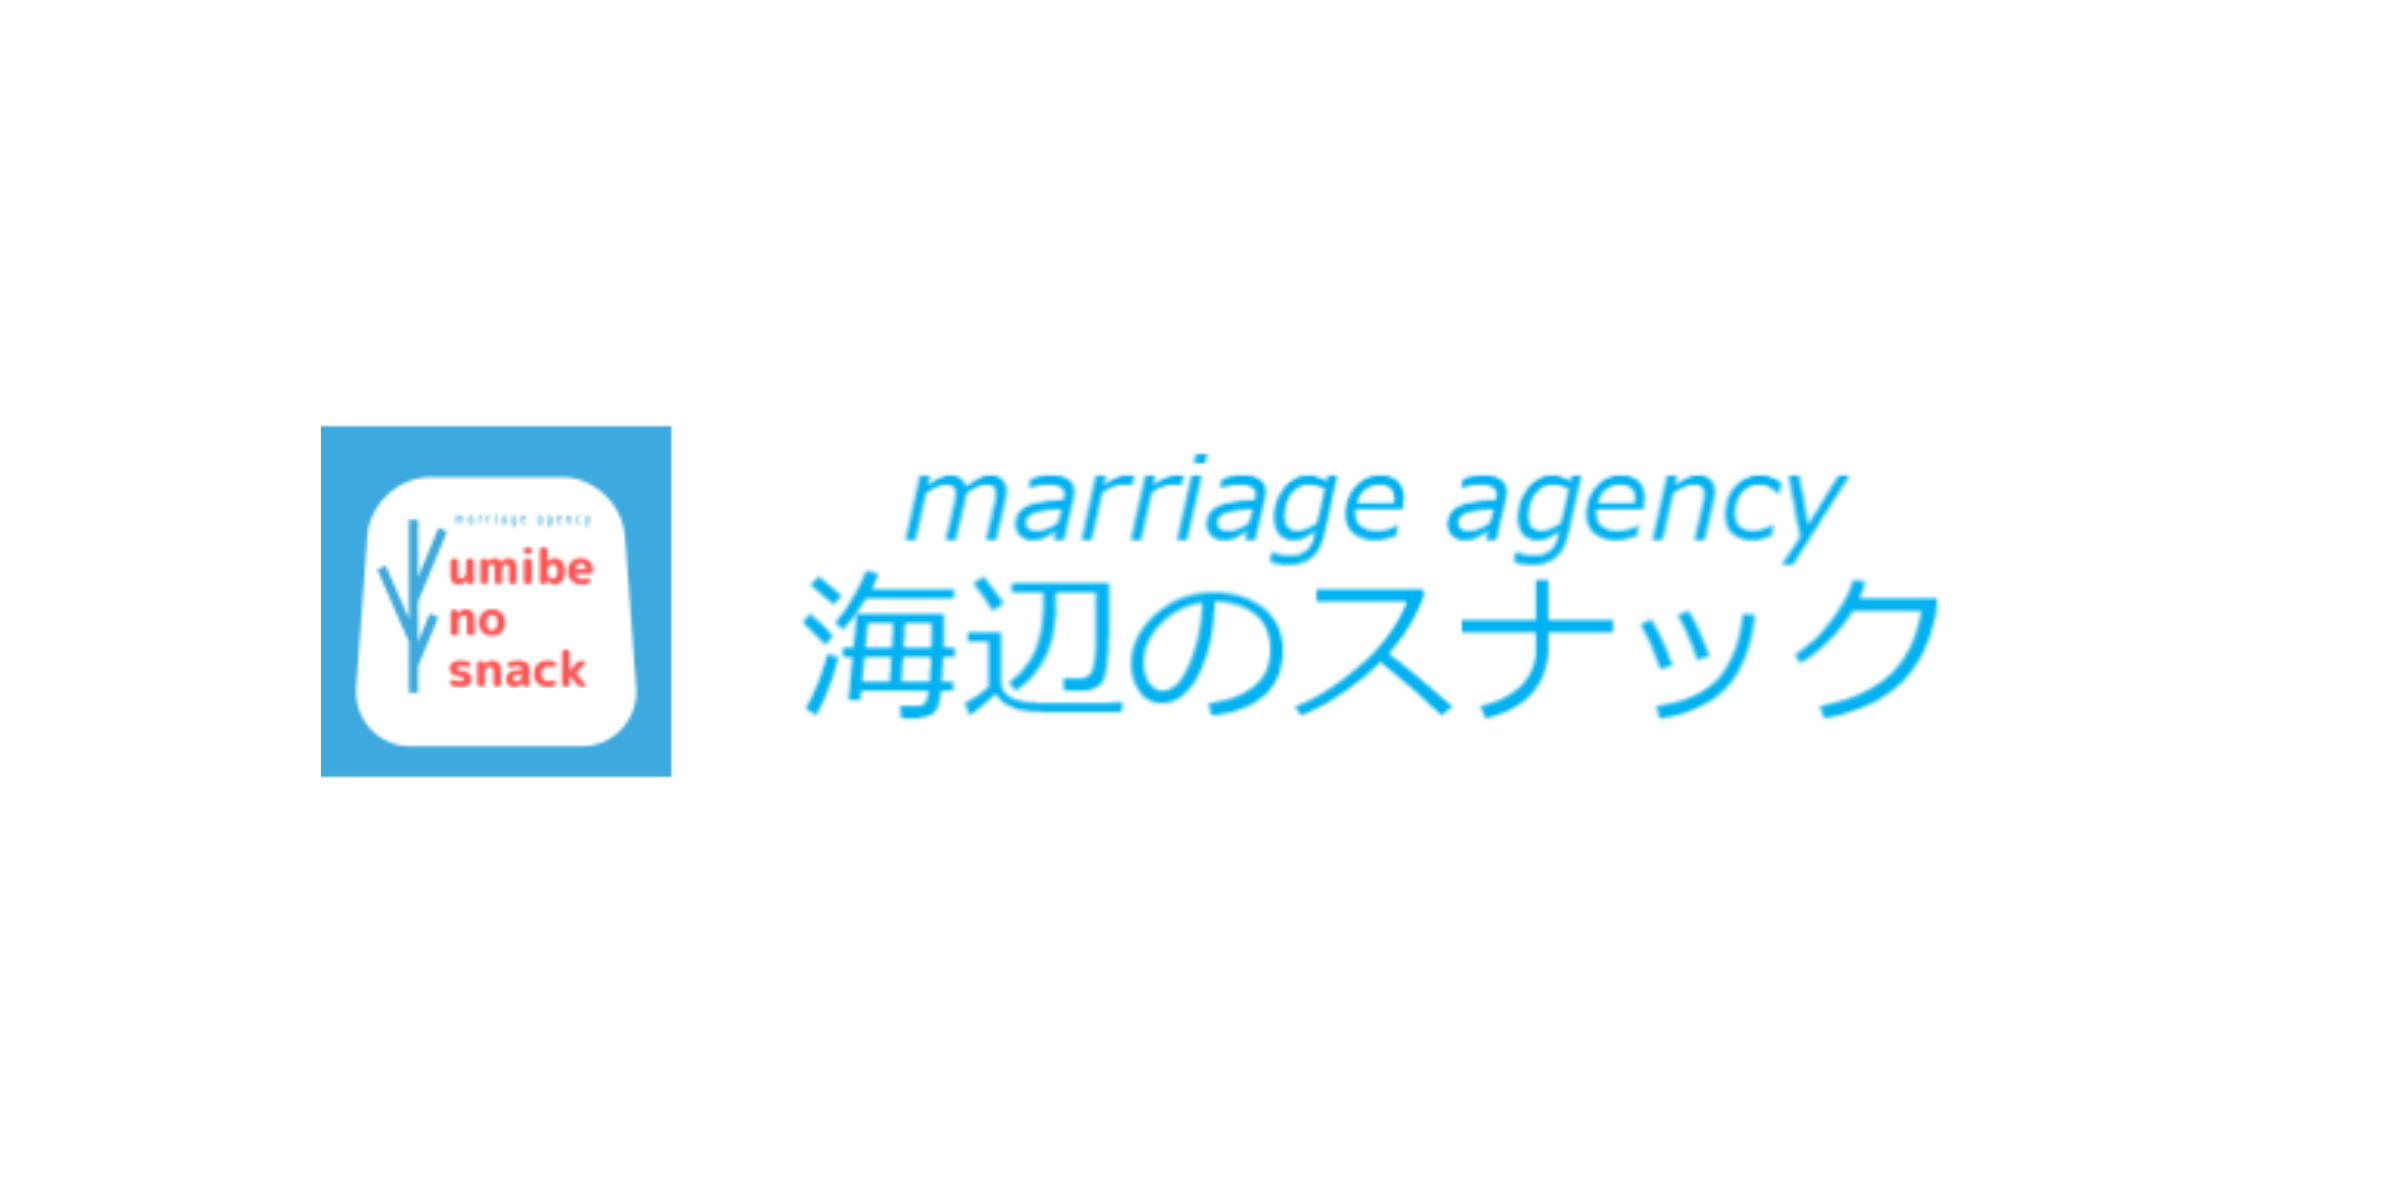 marriage agency 海辺のスナック